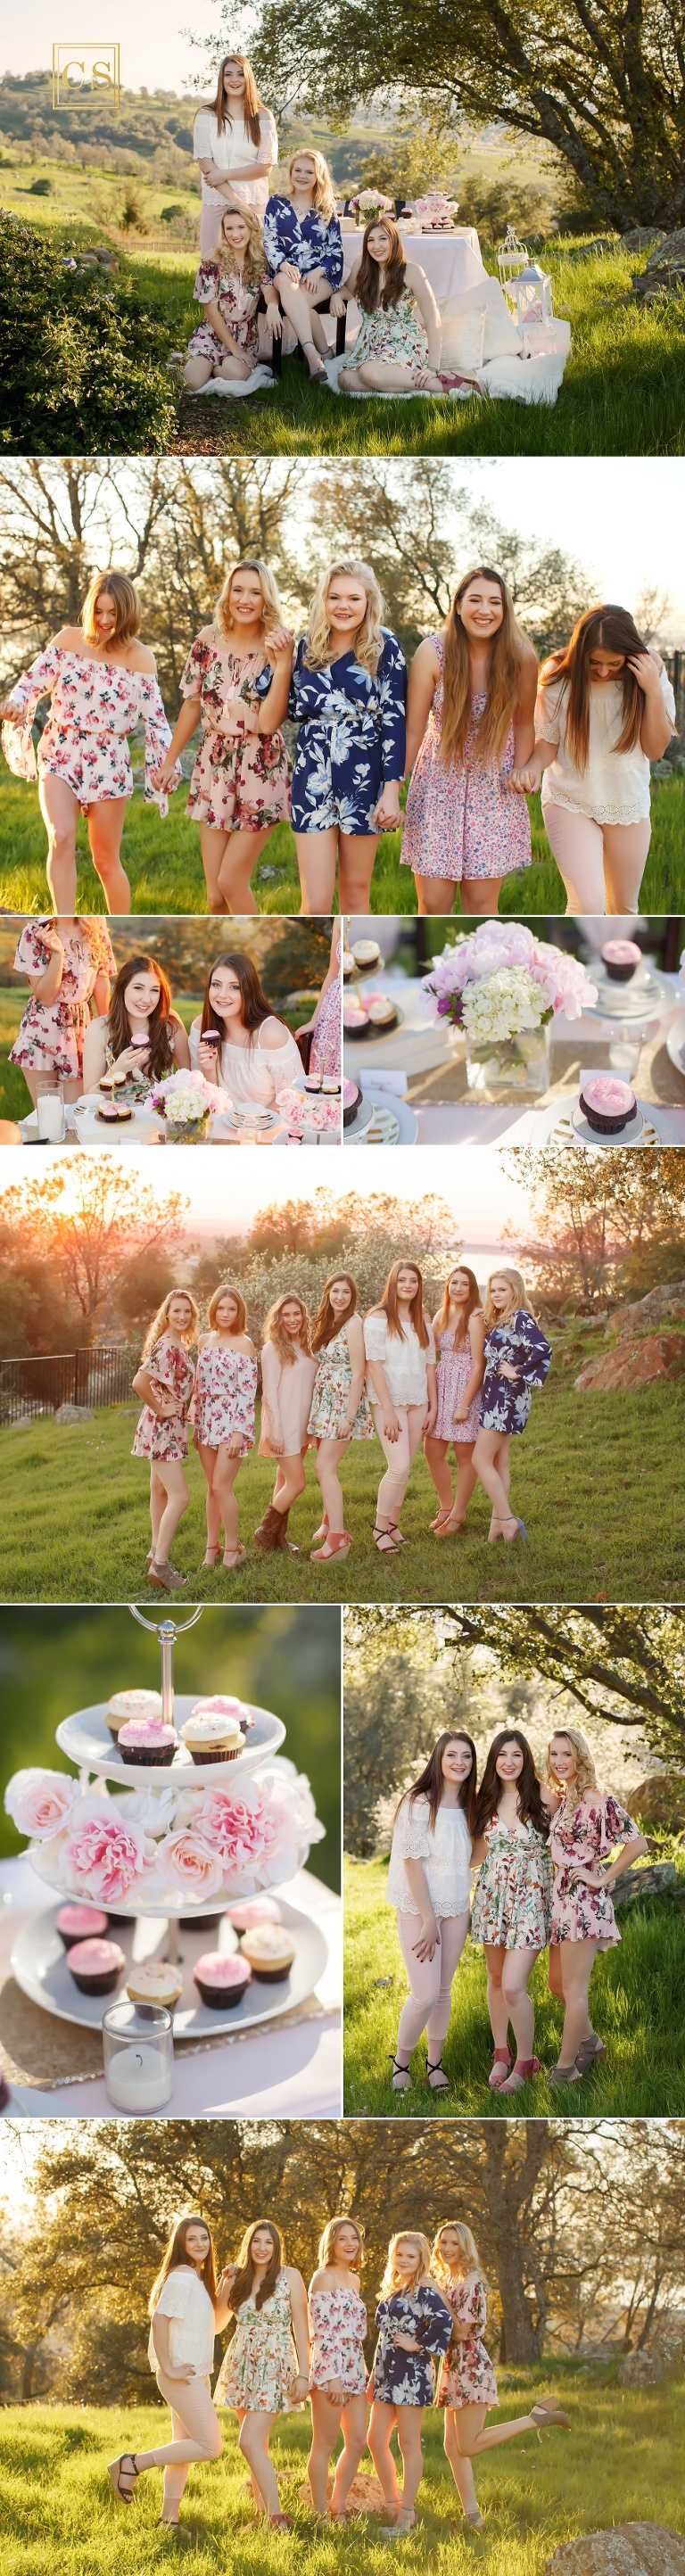 Senior models in El Dorado Hills golden hour cupcake flower theme session with Colleen Sanders Photography with detail shots, floral rompers, sunset, Folsom Lake.